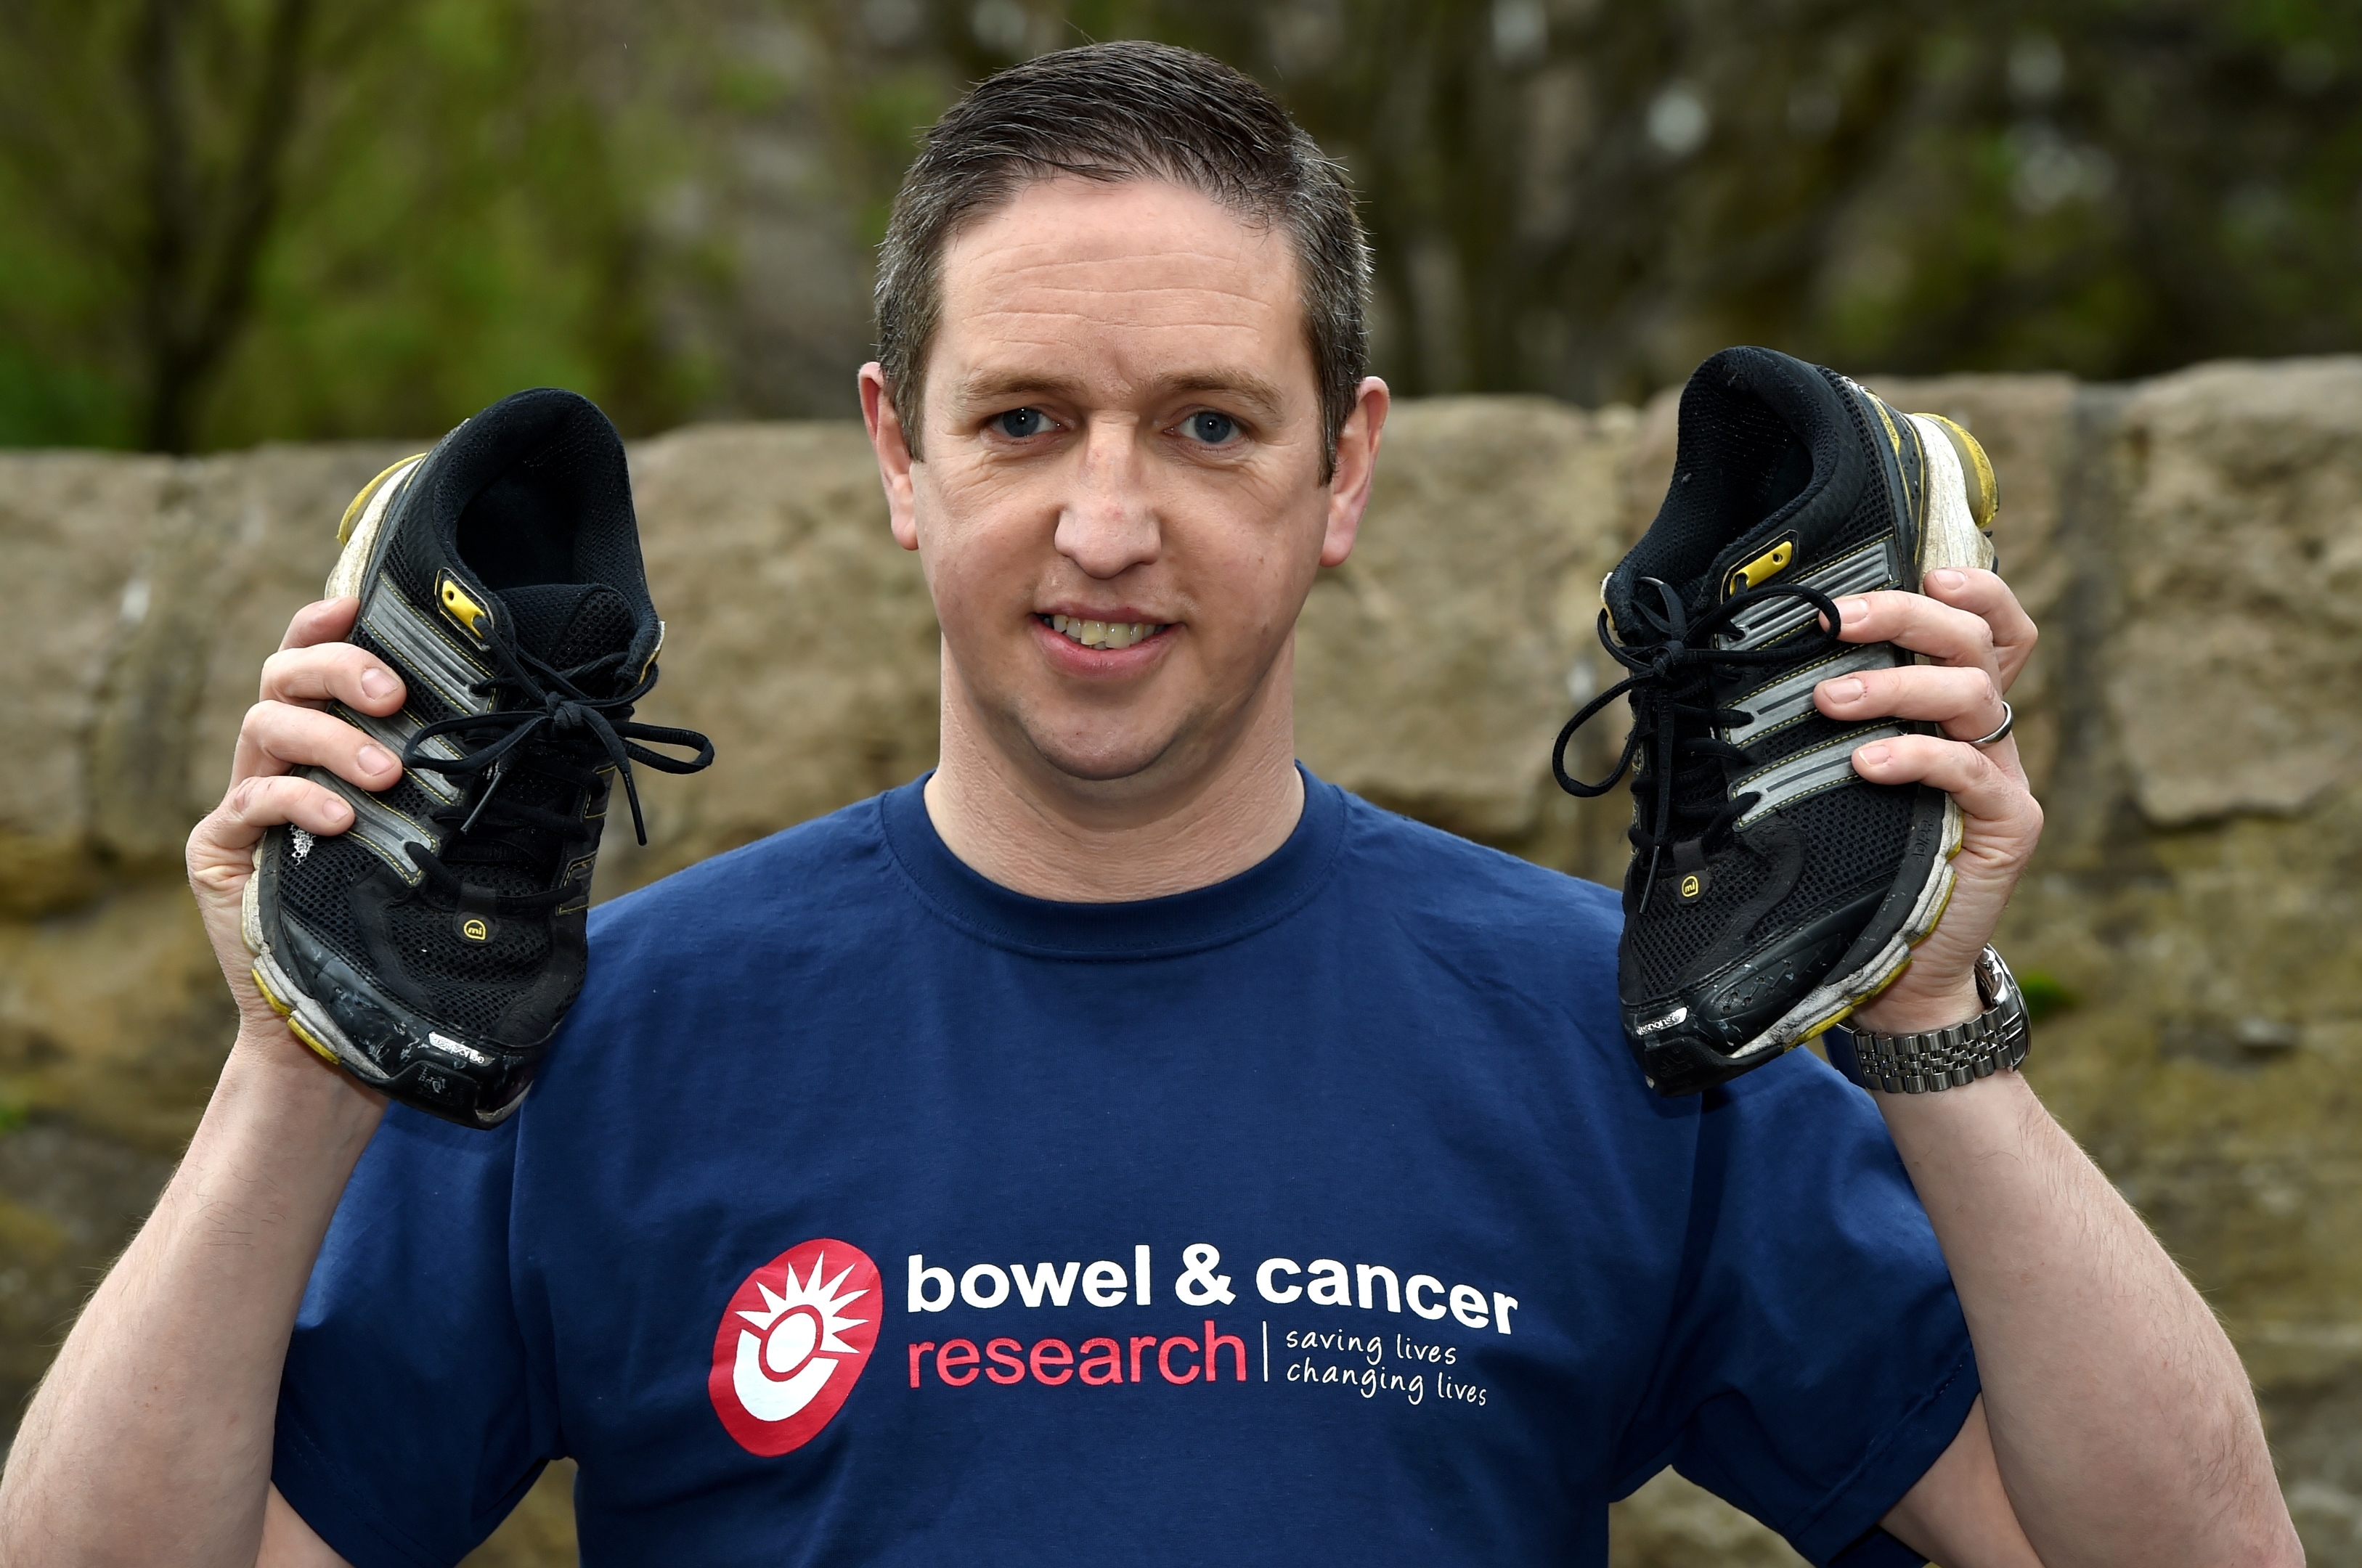 Andy Farquhar is running the London Marathon for a bowel cancer charity in memory of his mum Elizabeth and gran Betty, who both died from the illness. Picture by Kenny Elrick.